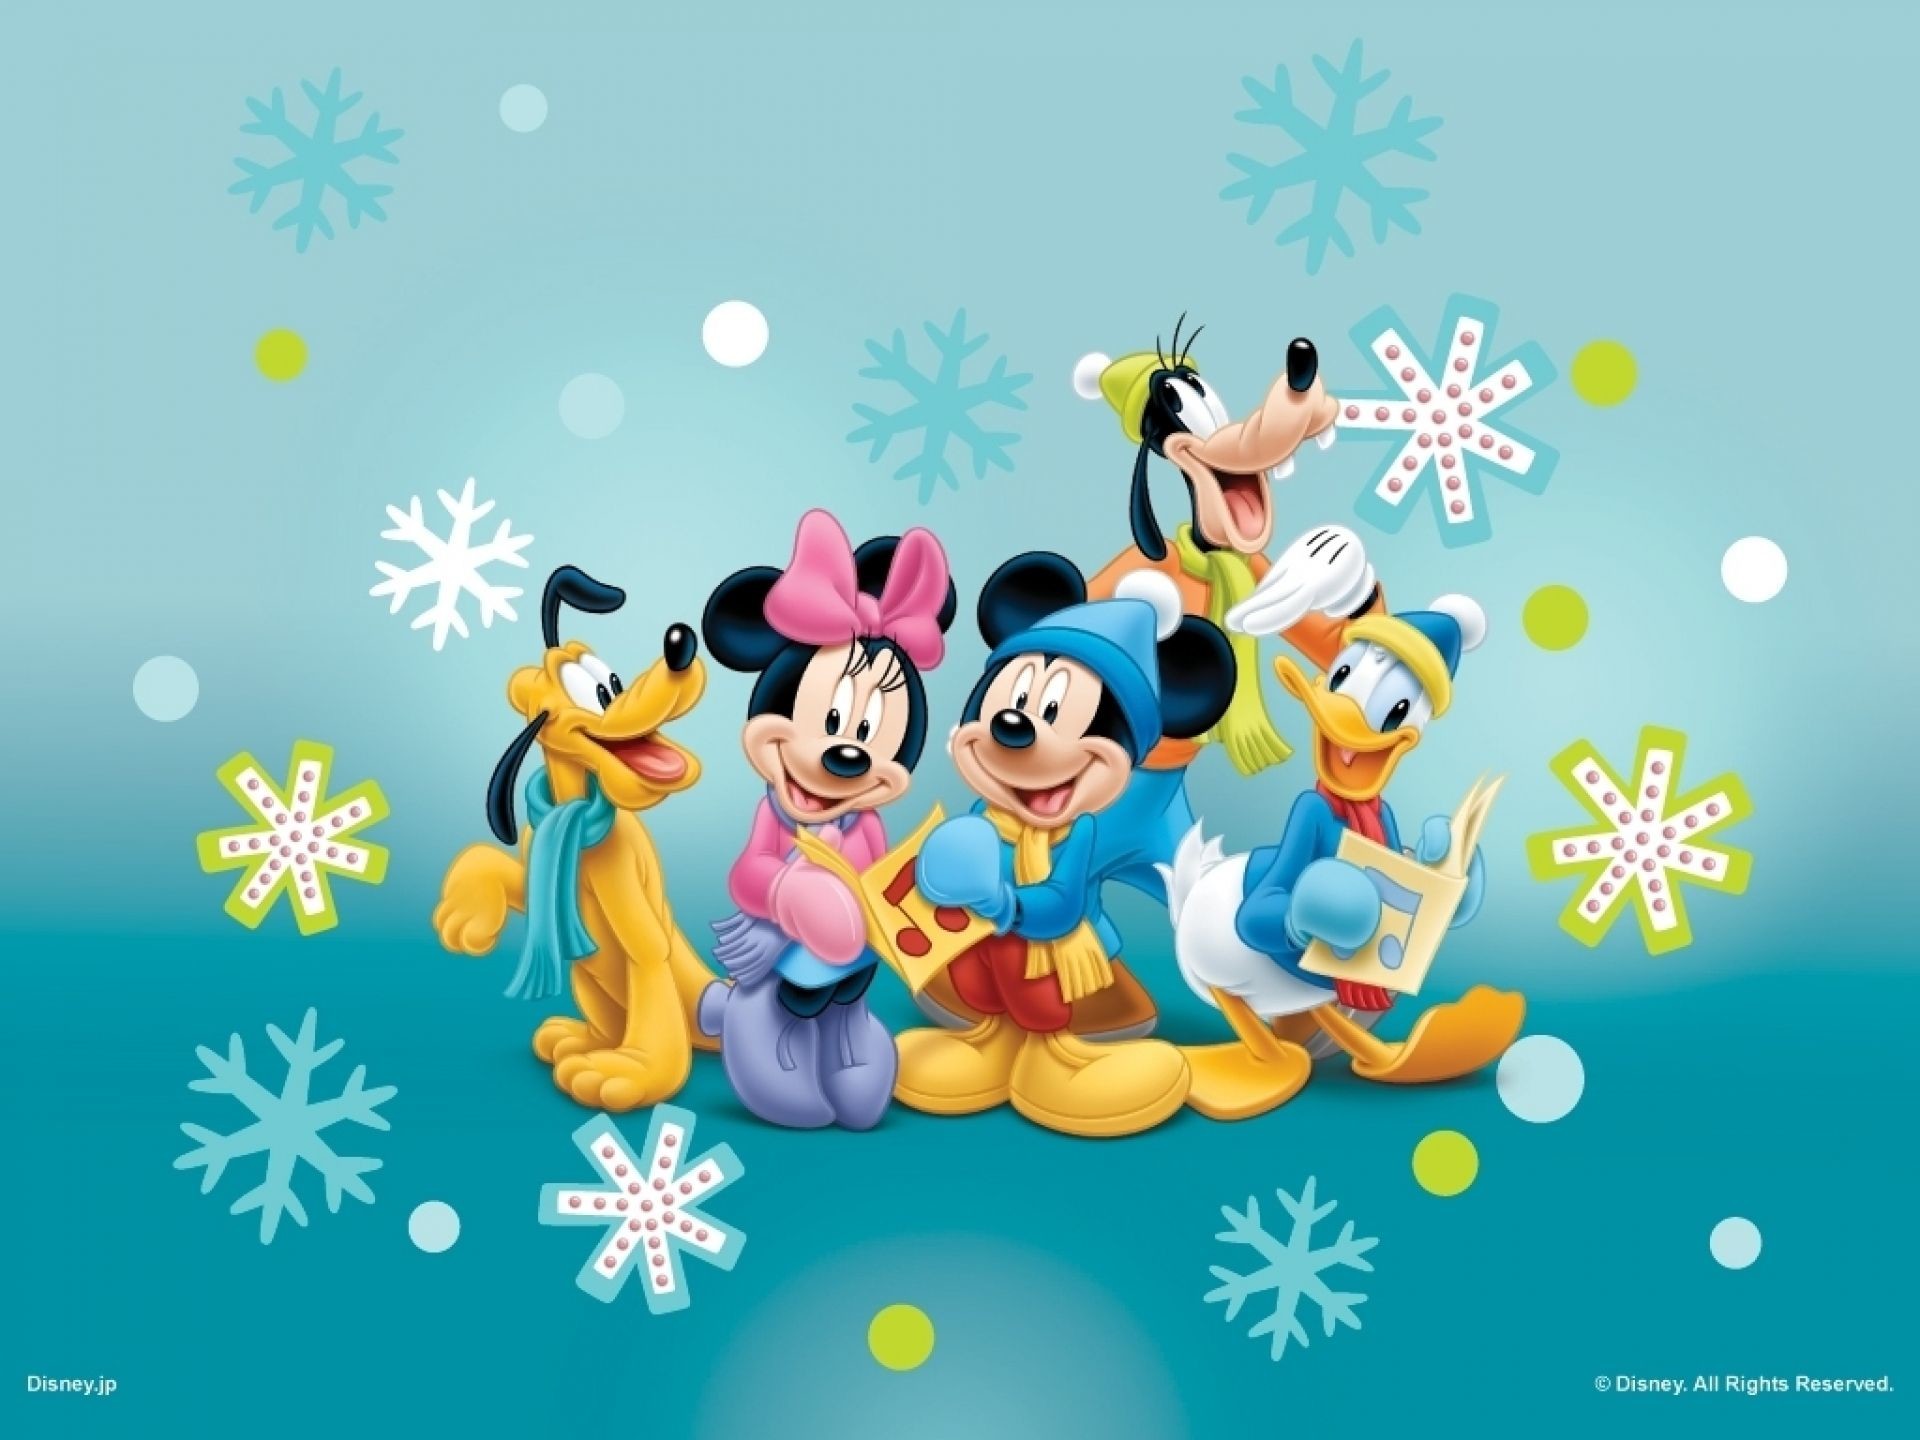 35 DISNEY Christmas Wallpaper Backgrounds For Your Phone